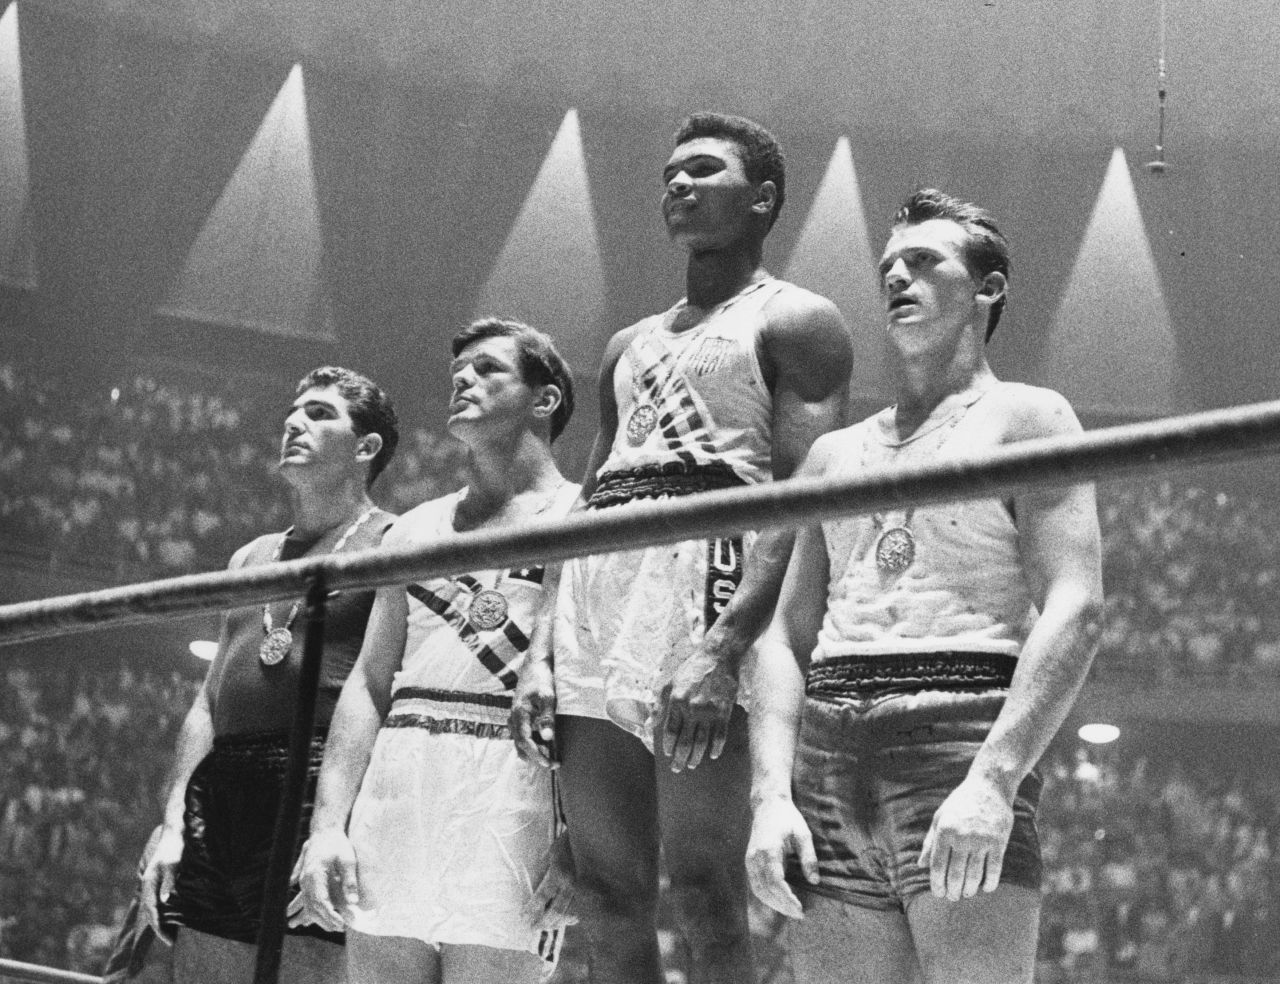 Cassius Clay, later to become known as Muhammad Ali, rose to prominence at the 1960 Olympic Games in Rome, where he claimed a boxing gold medal in the light heavyweight division.